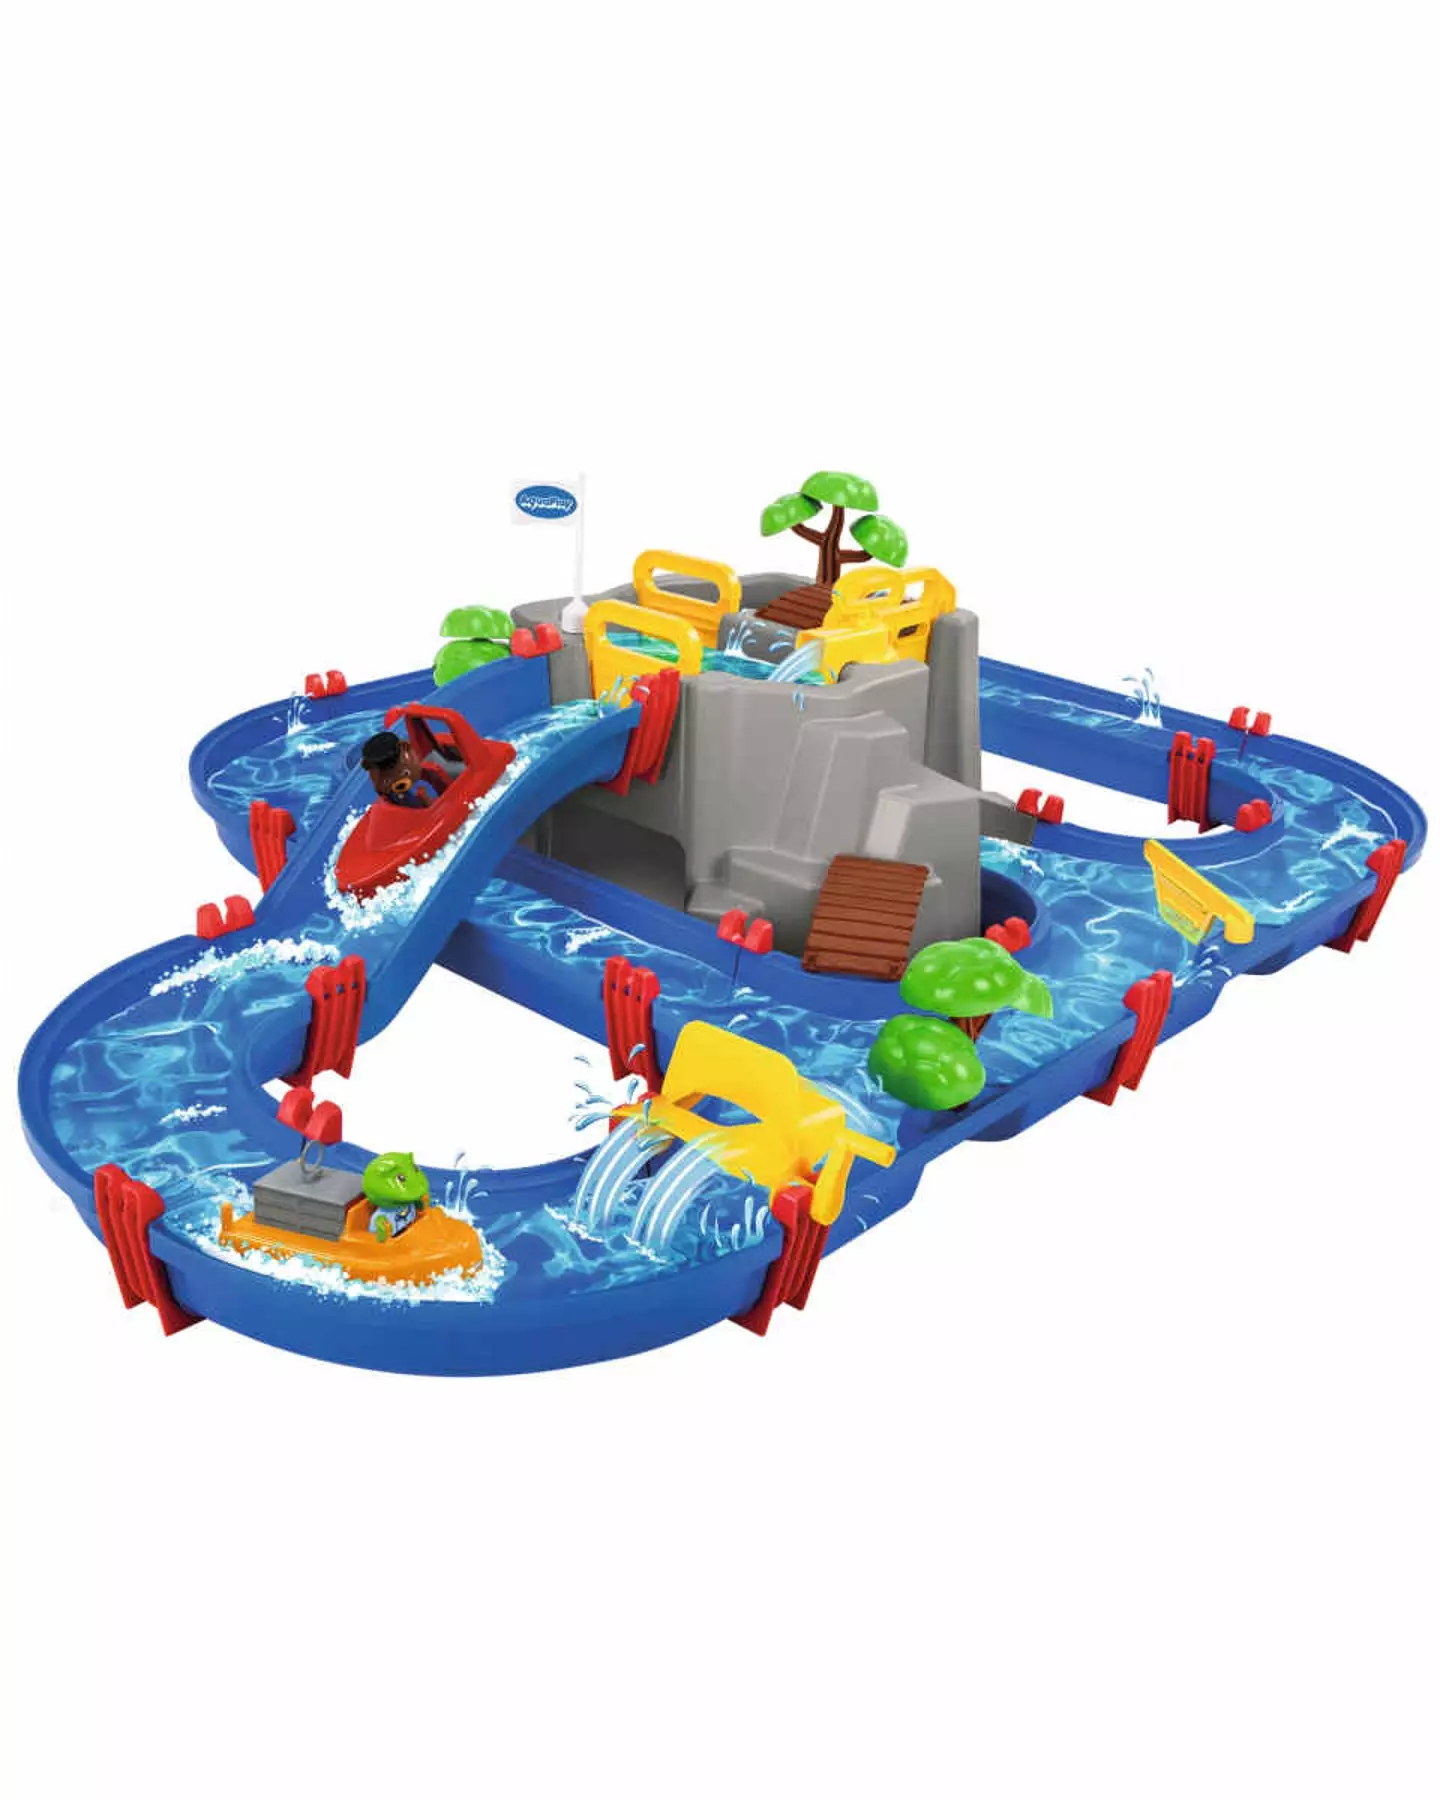 The Aquaplay Mountain Lake is some more interactive fun for any kids in your life (